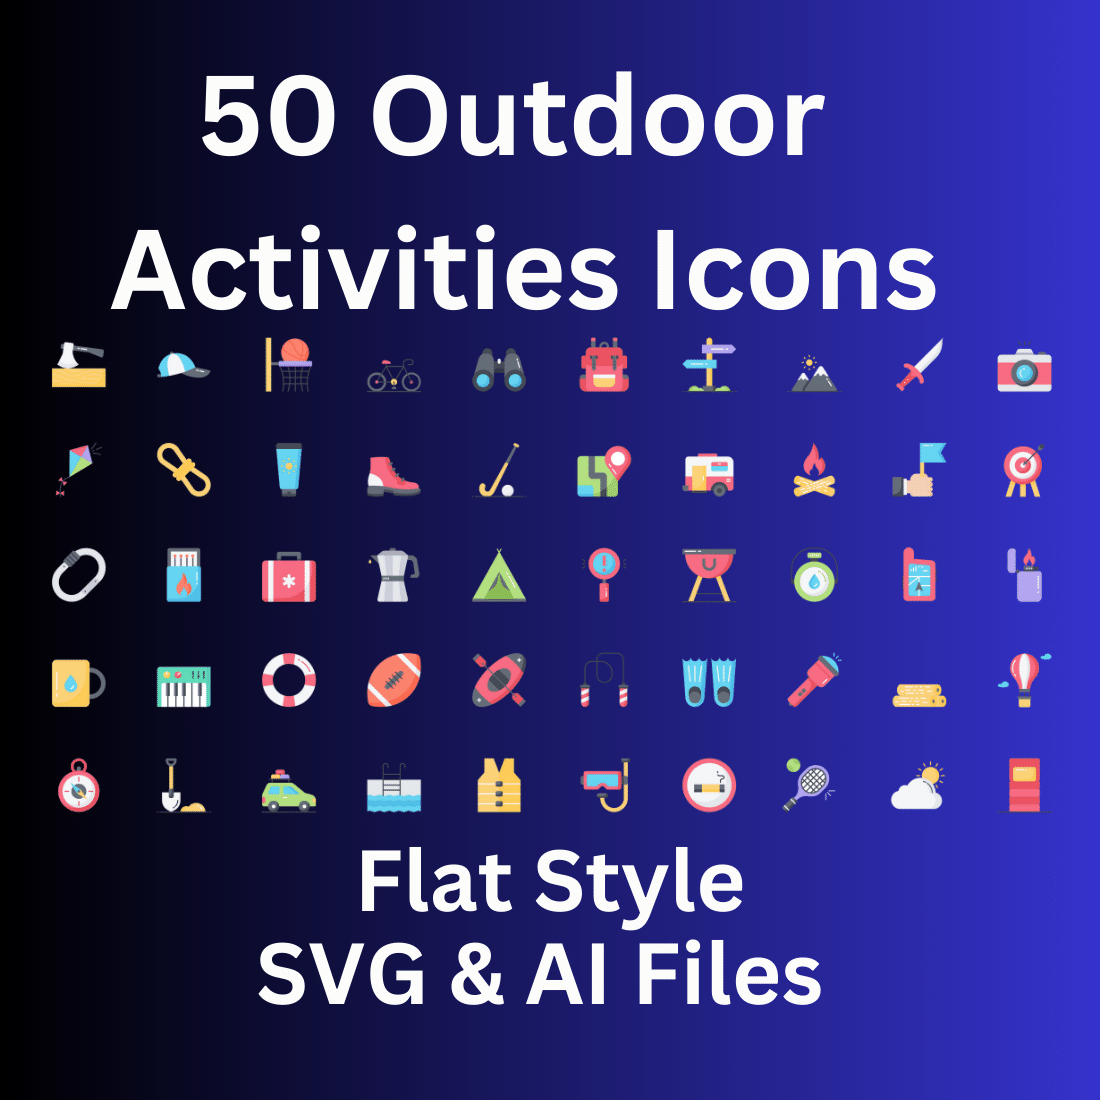 Outdoor Activities Icon Set 50 Flat Icons - SVG And AI Files preview image.